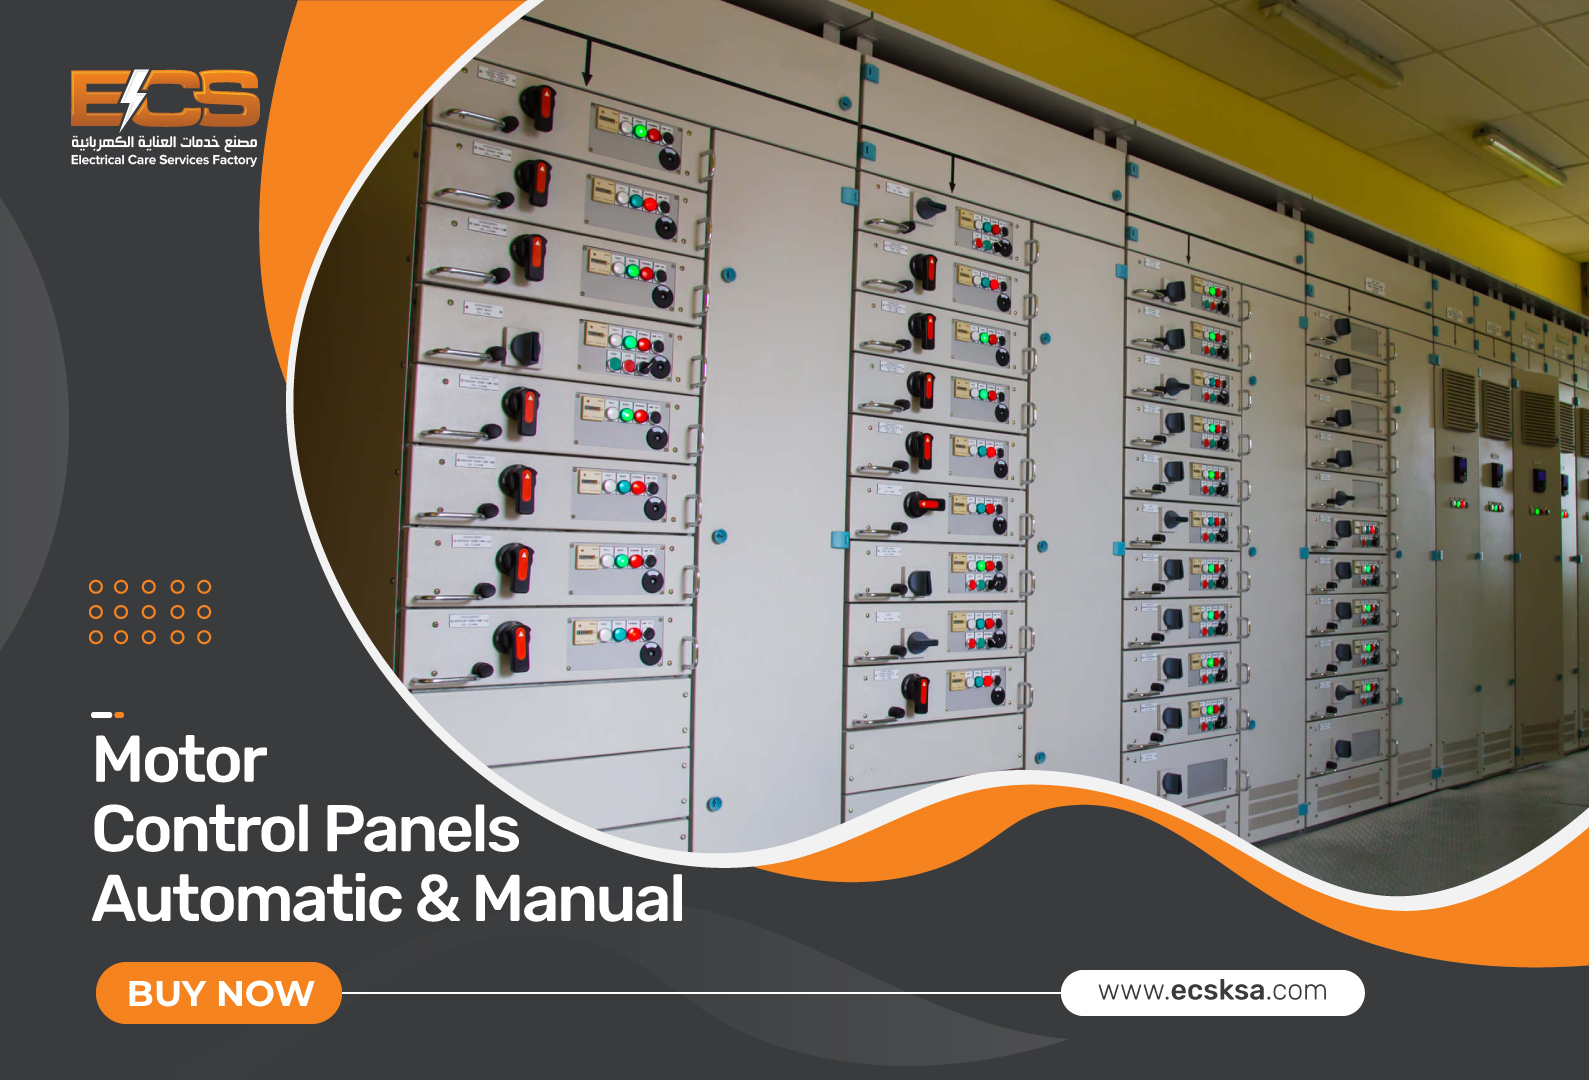 What is a Motor Control Panel